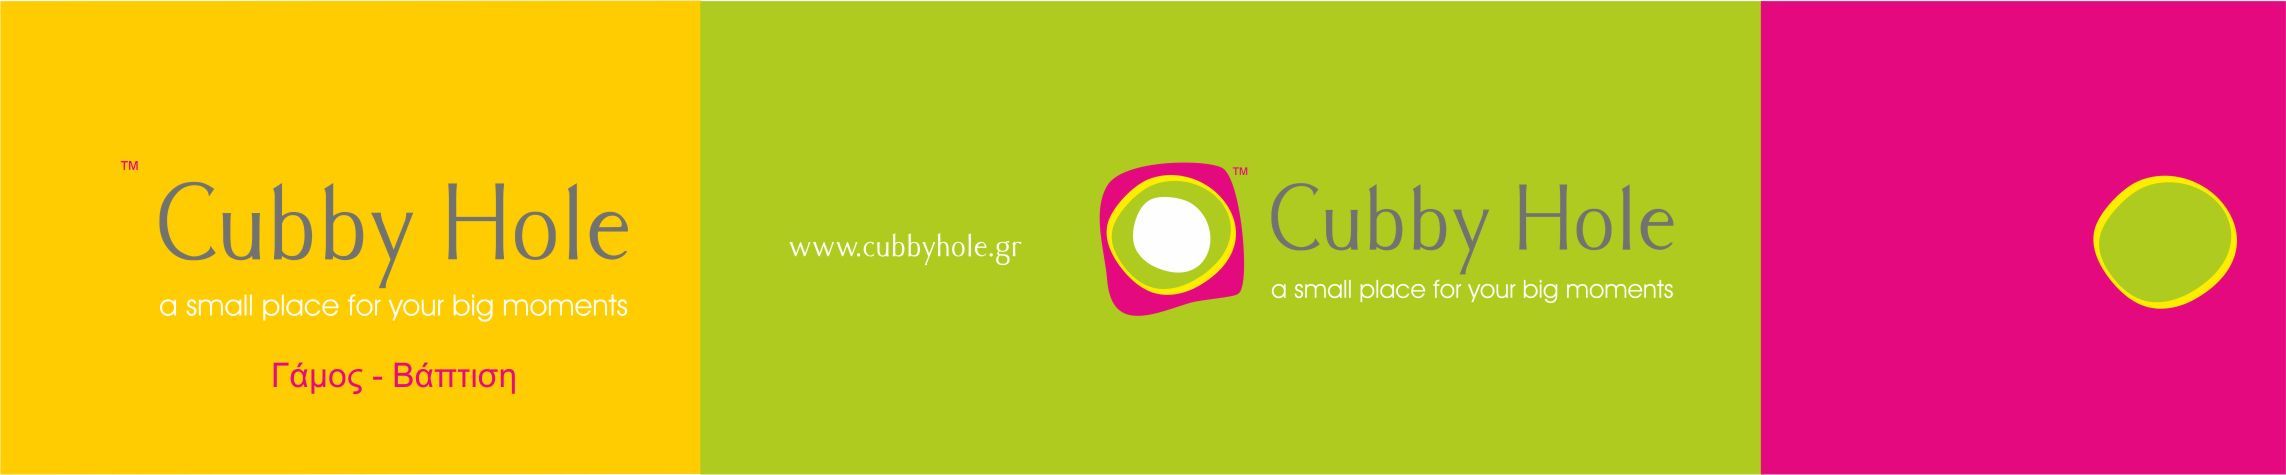 Cubby Hole business cards to print